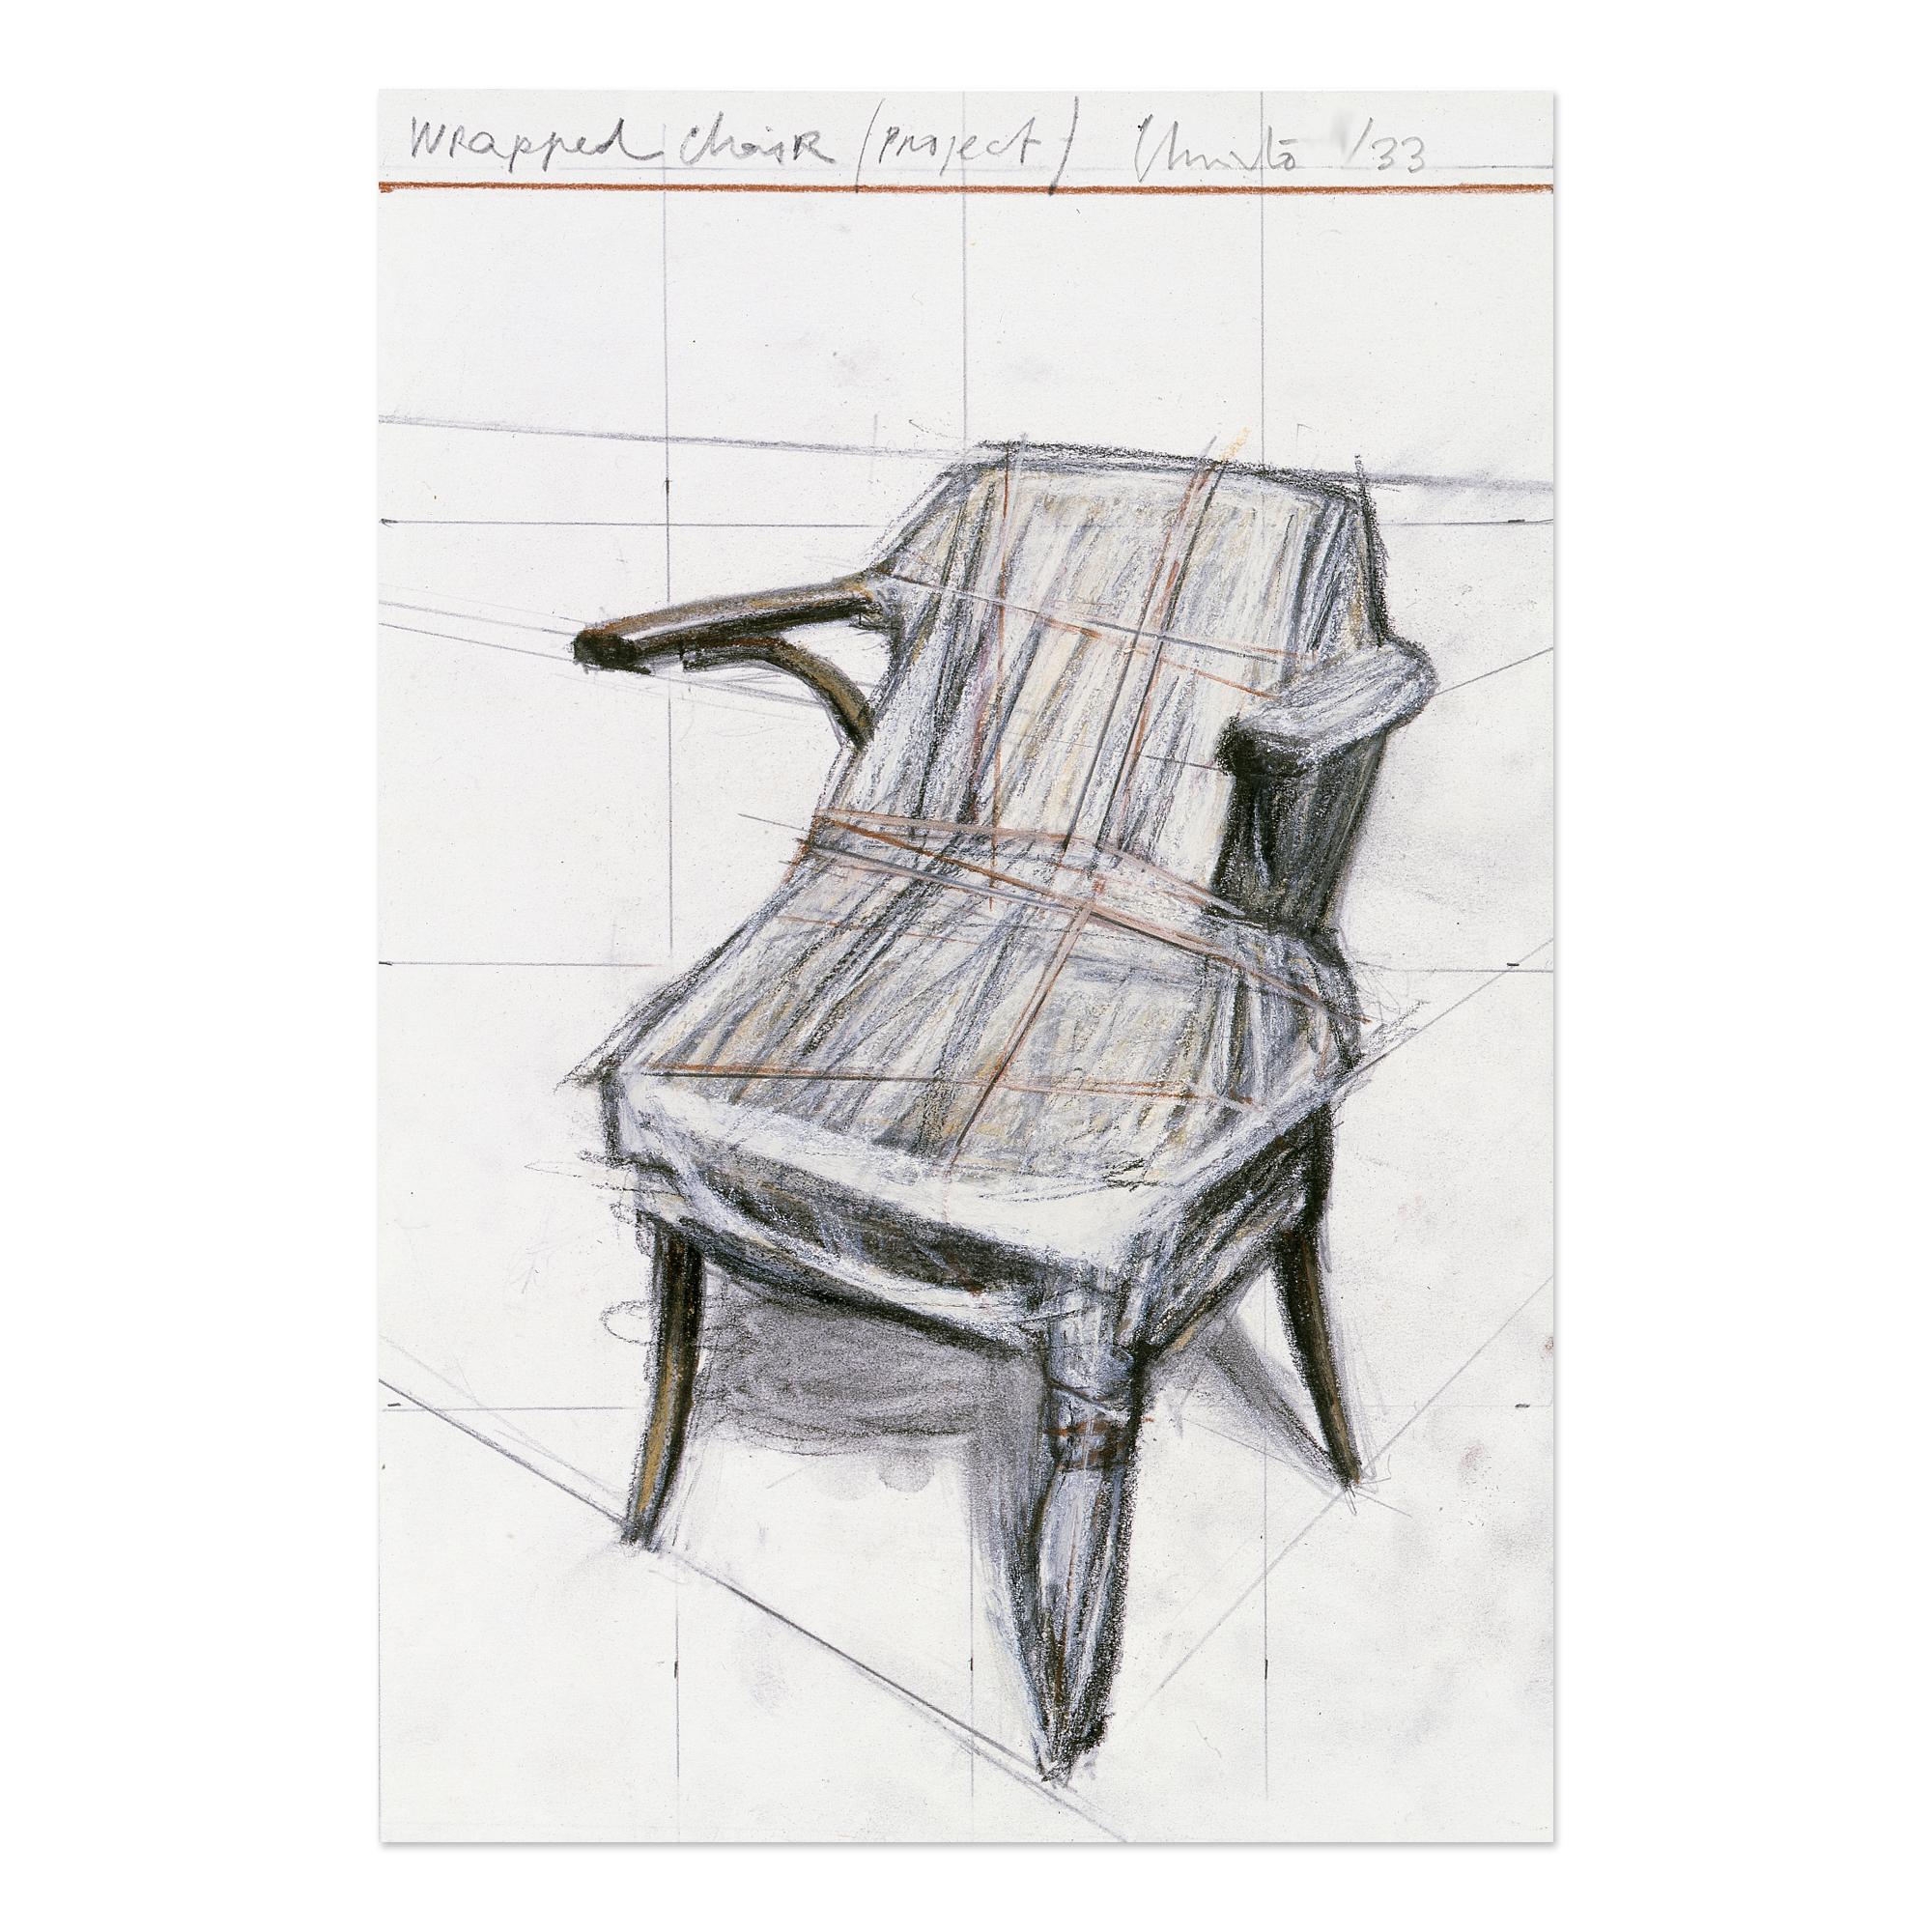 Christo and Jeanne-Claude (American, Bulgarian and Moroccan, 1935-2020 and 1935-2009)
Wrapped Chair (Project), from Thonet 200 Project, 1963/2019
Medium: Digital pigment print and silkscreen on Photo Rag Ultra Smooth Paper
Dimensions: 26.5 × 18 cm